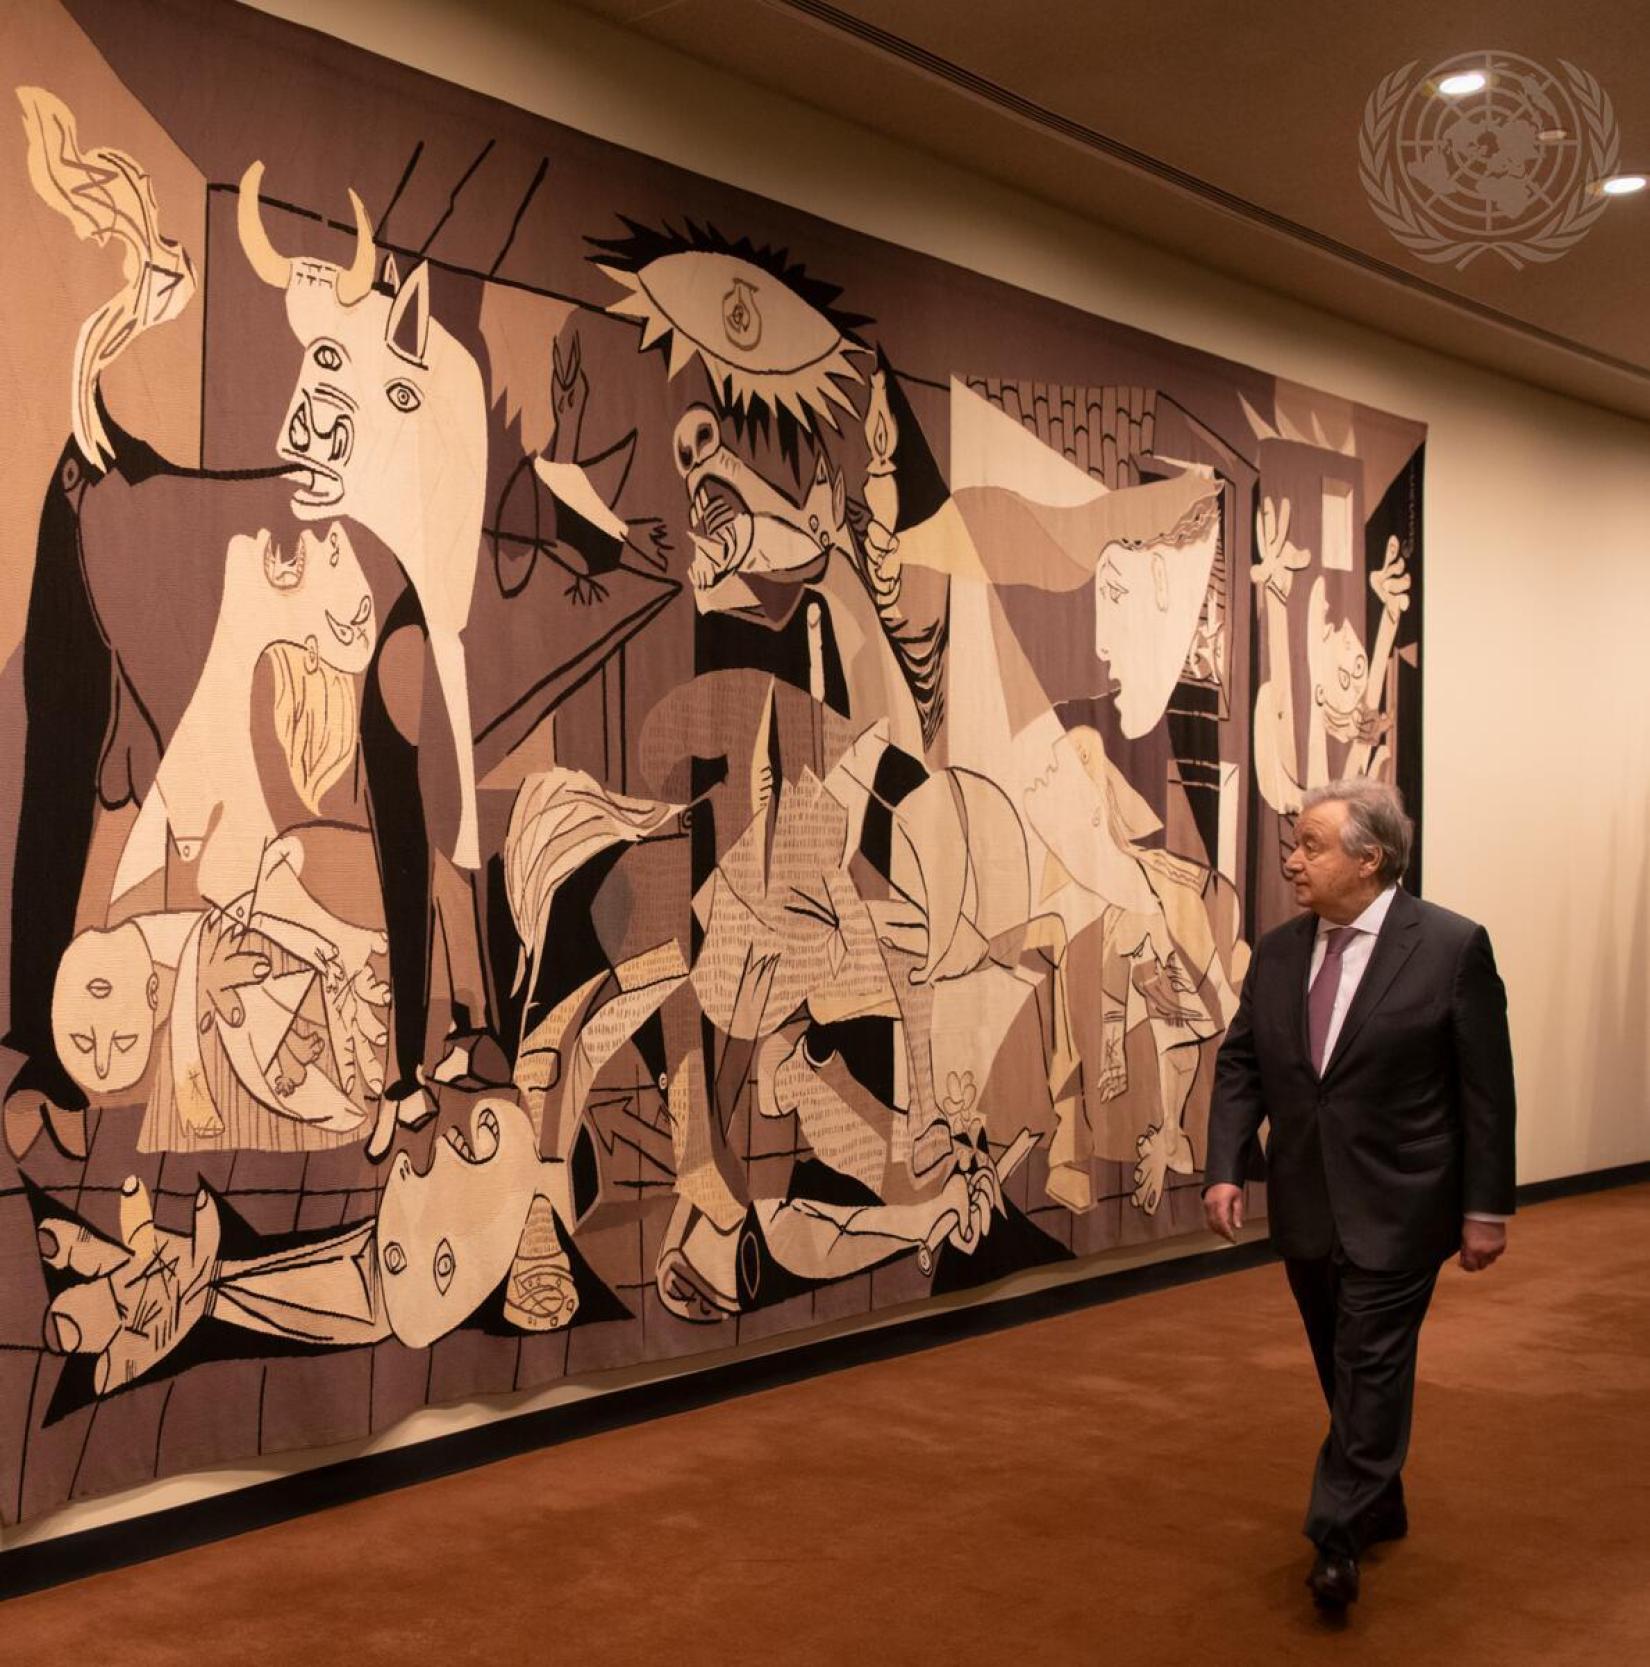 Picasso's Guernica tapestry returns to the United Nations